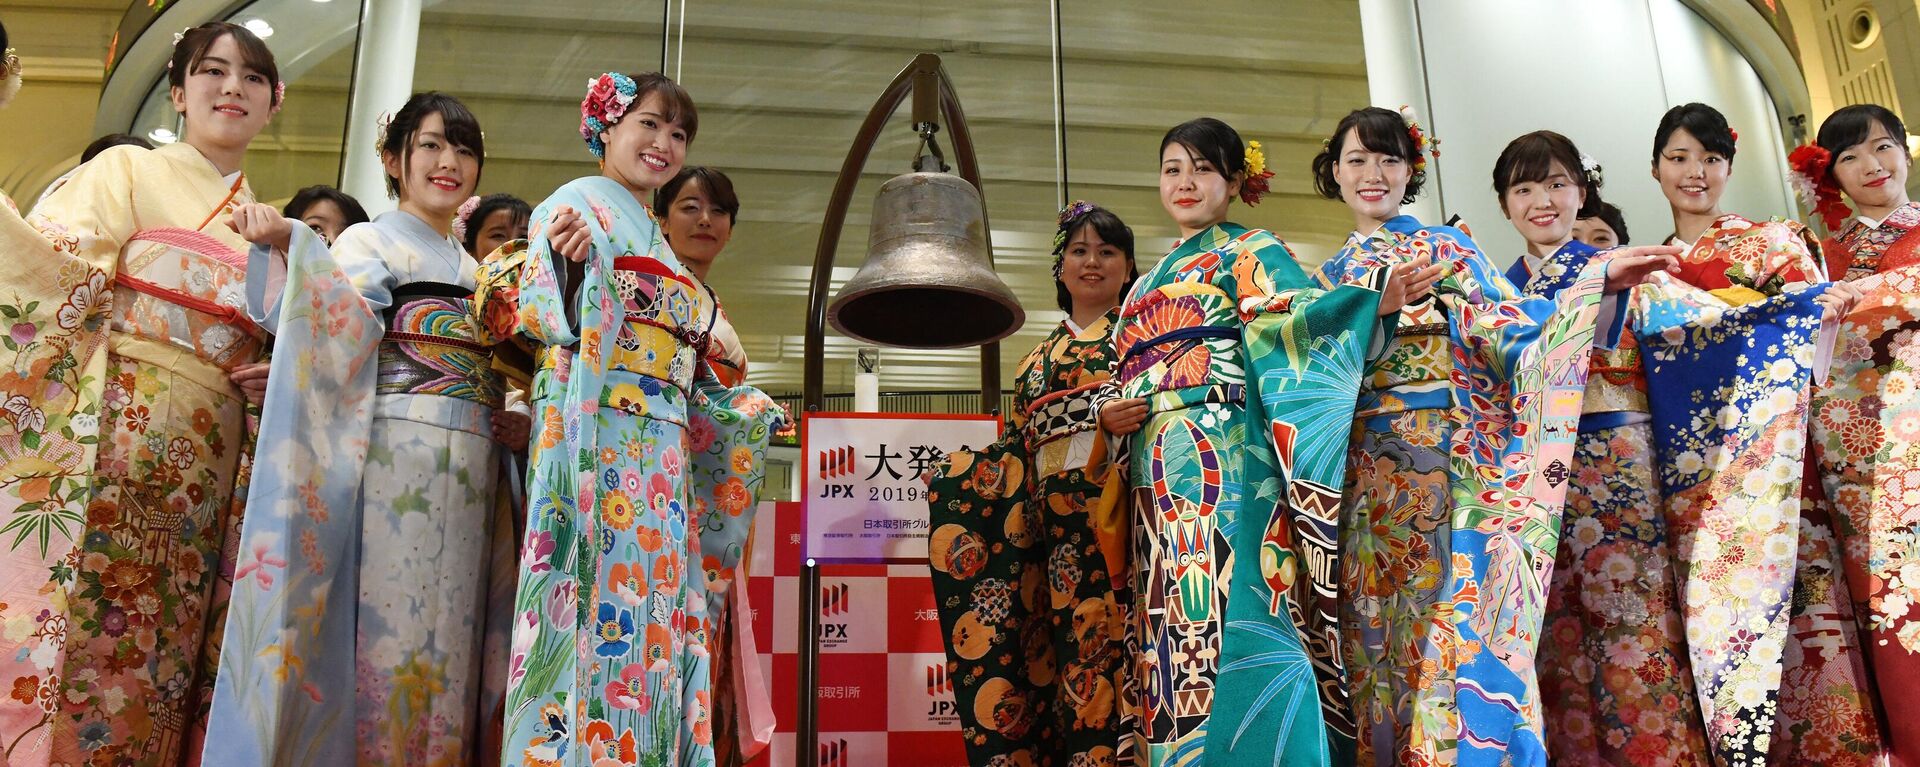 Employees in Japanese traditional Kimonos pose during the Tokyo Stock Exchange's new year business ceremony in Tokyo on January 4, 2019. (Photo by TOSHIFUMI KITAMURA / AFP) - Sputnik International, 1920, 24.12.2022